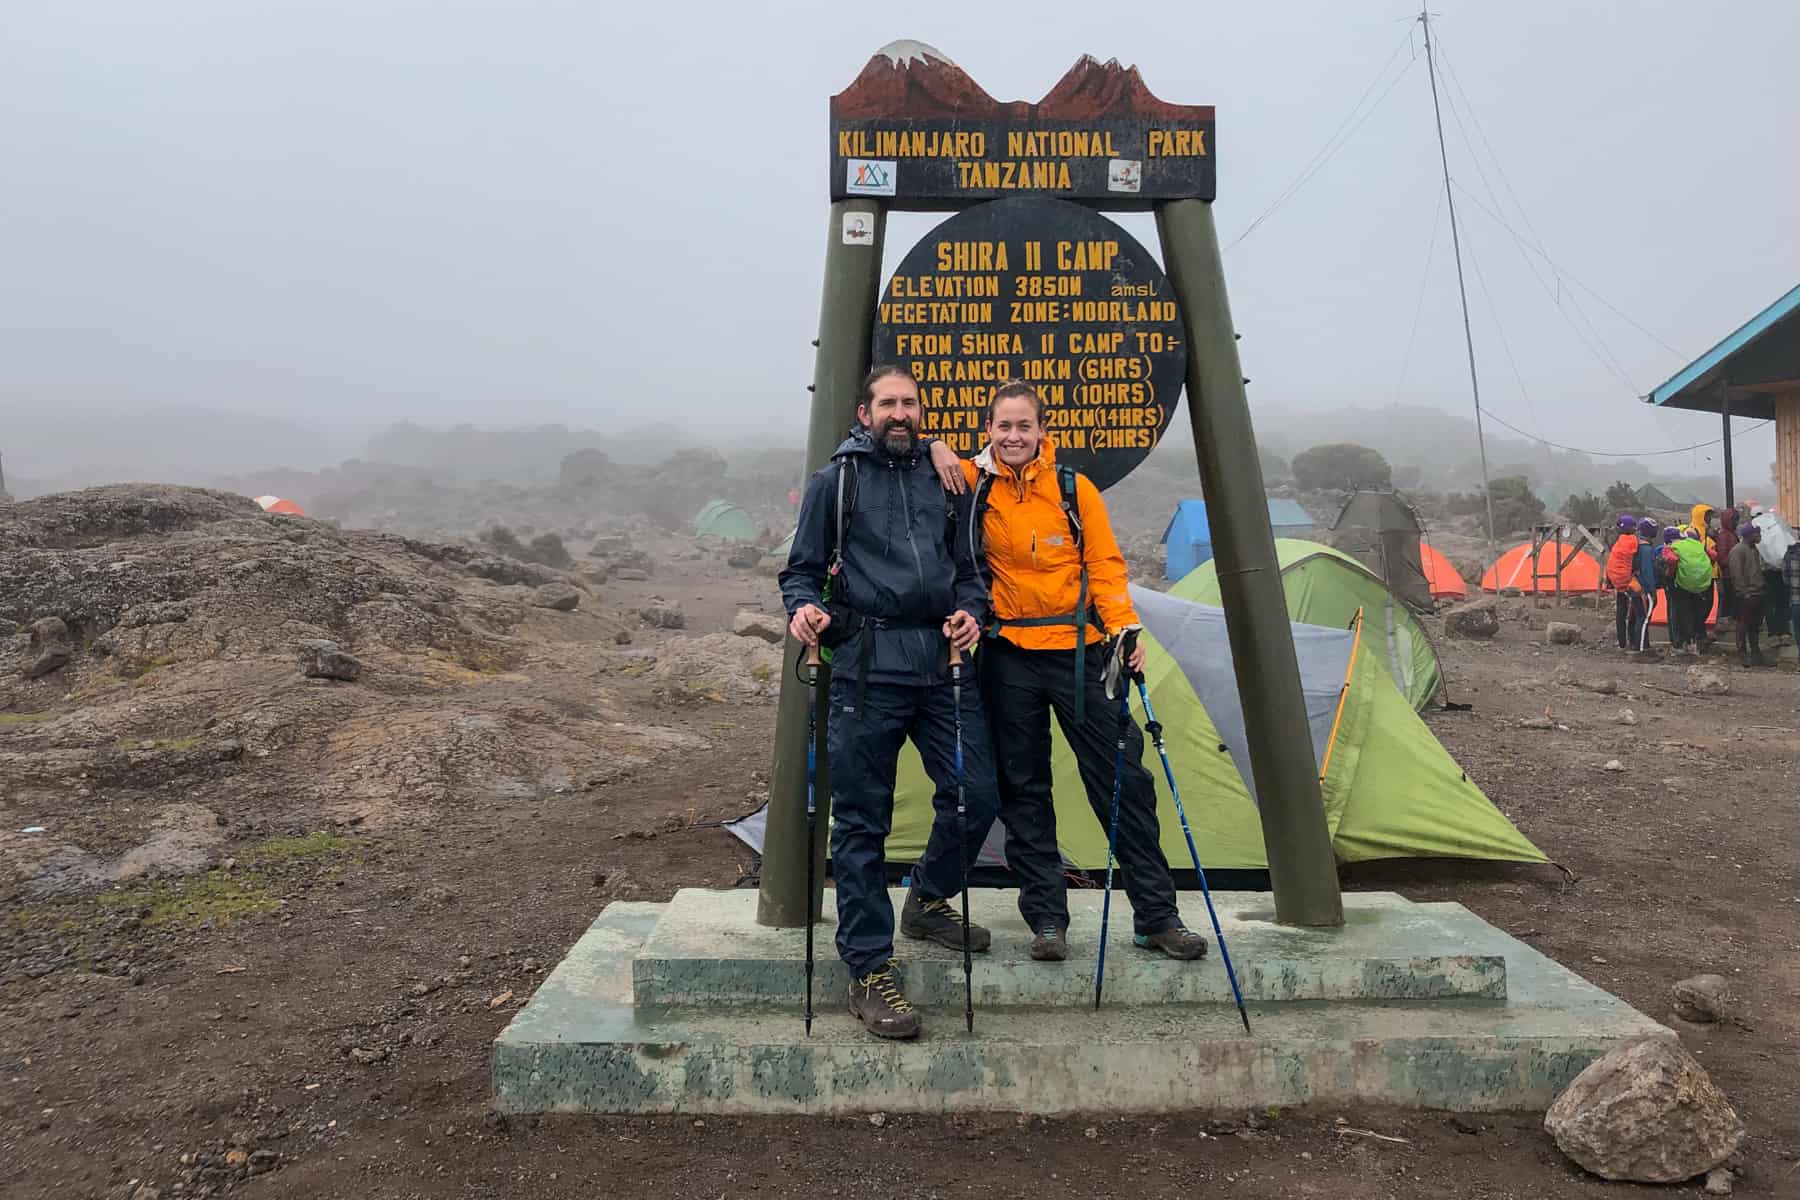 A man in blue and a woman in orange standing at the brown "Shira II Camp" Kilimanjaro sign with tents and people in the background shrouded in mist 